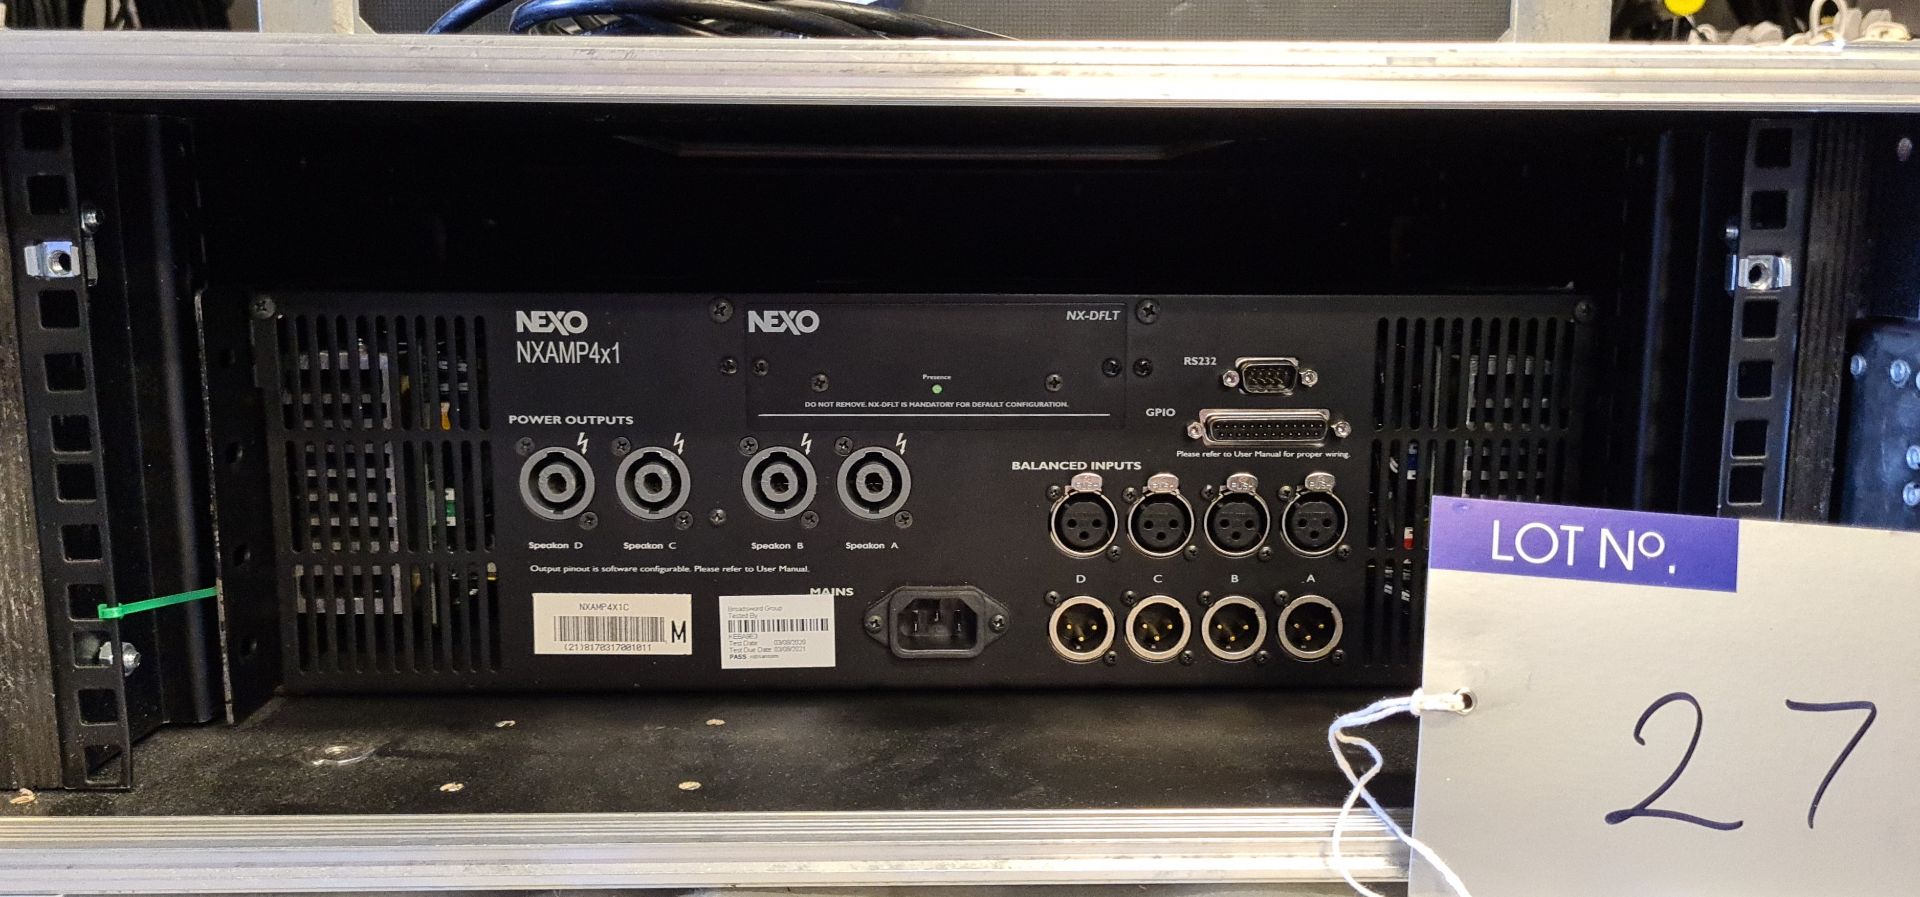 A Nexo NXAMP 4x1 Digital Power Amplifier with flight case (fully tested and working). - Image 2 of 2